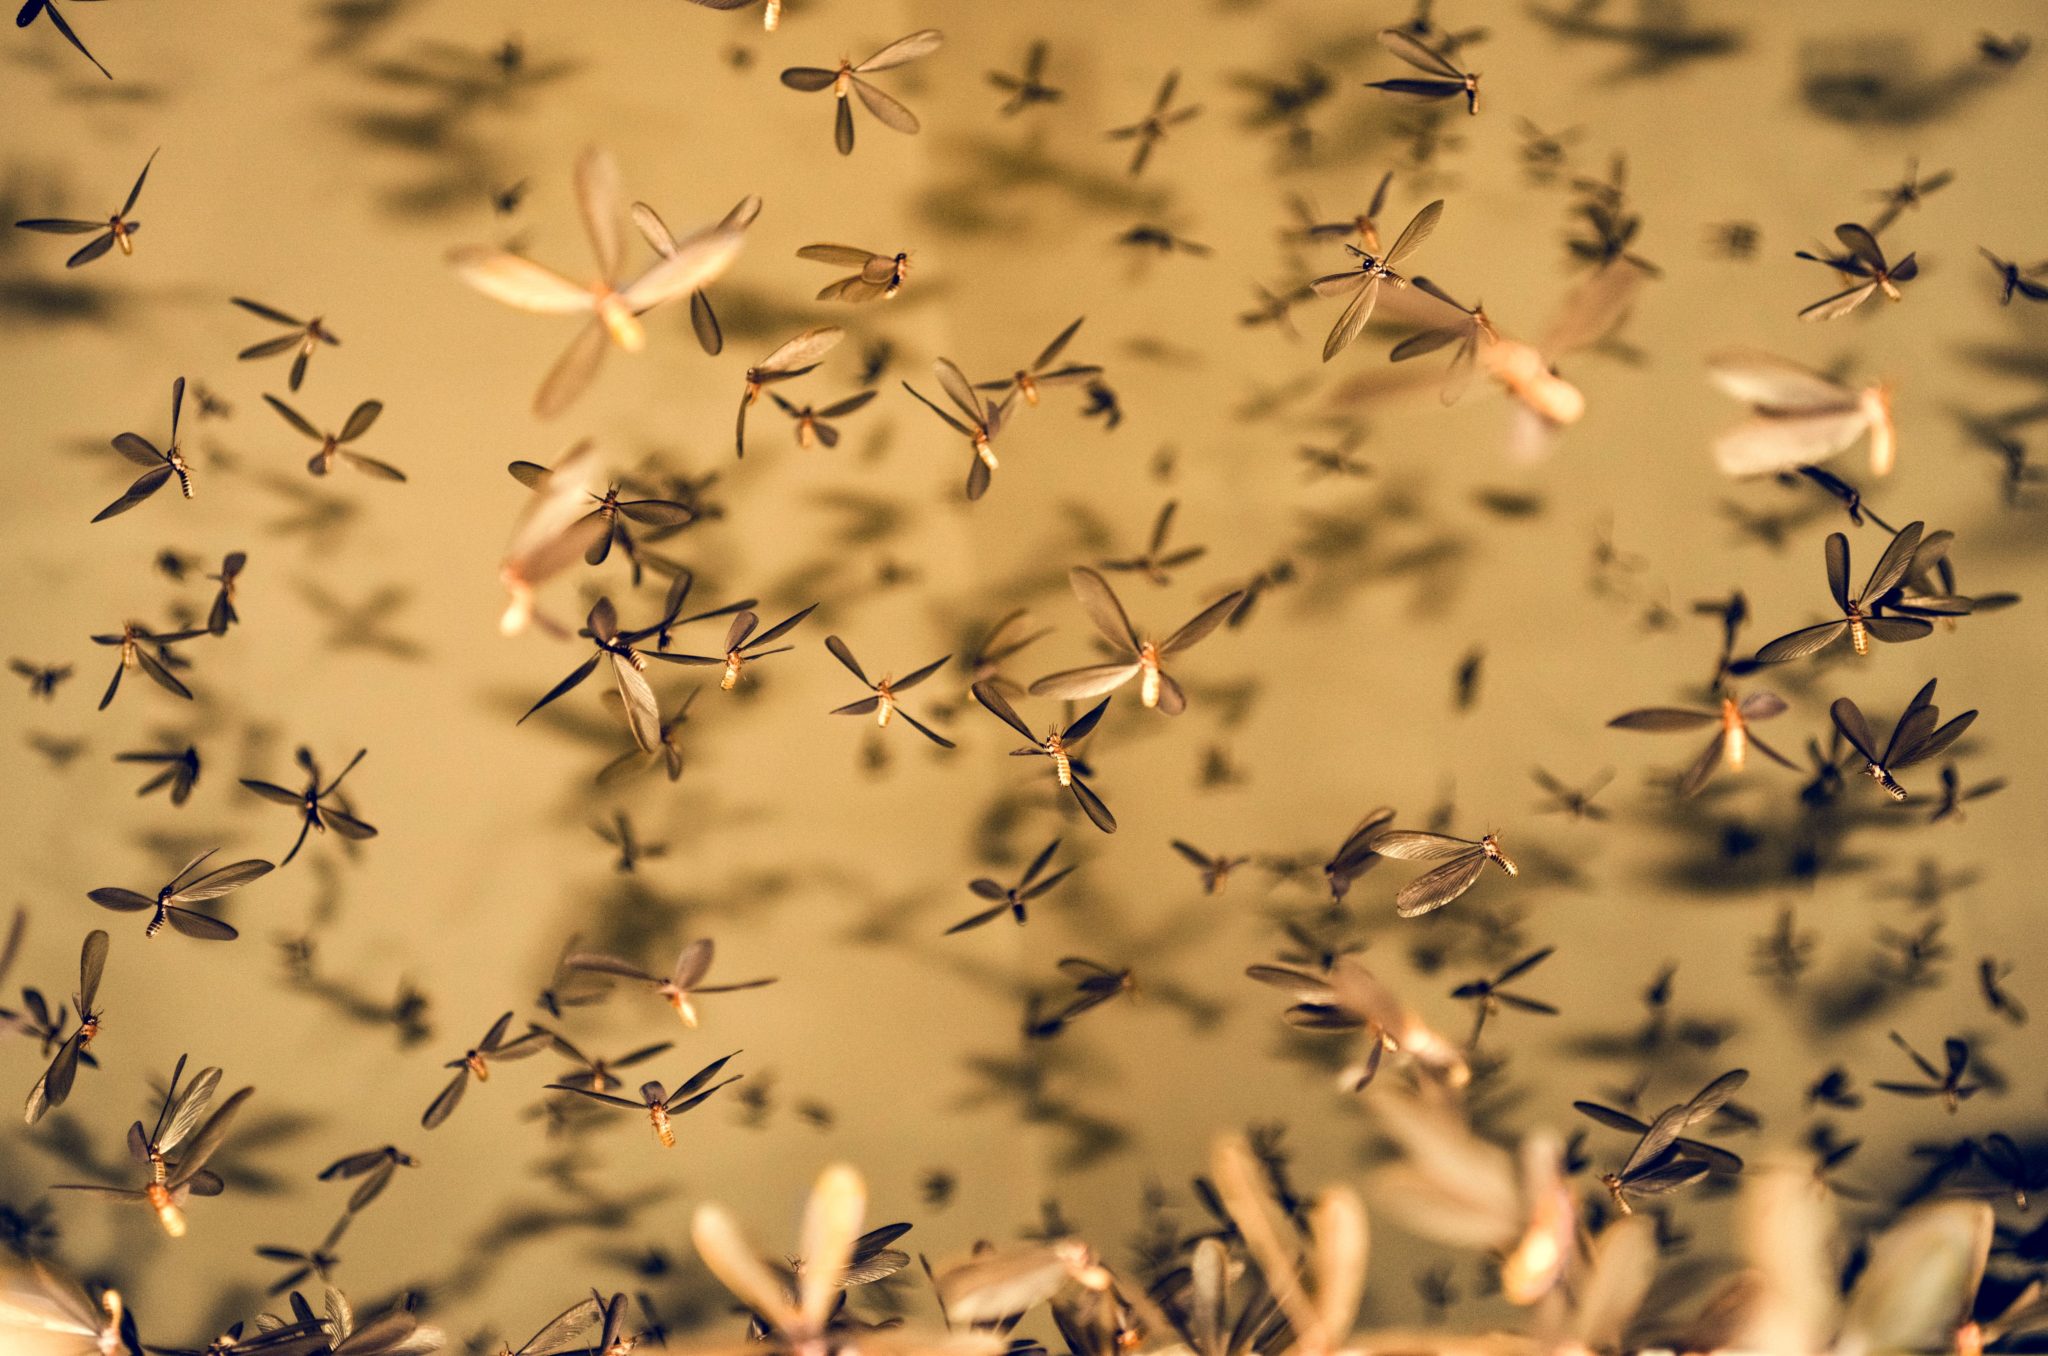 What Do Termite Swarms Mean?